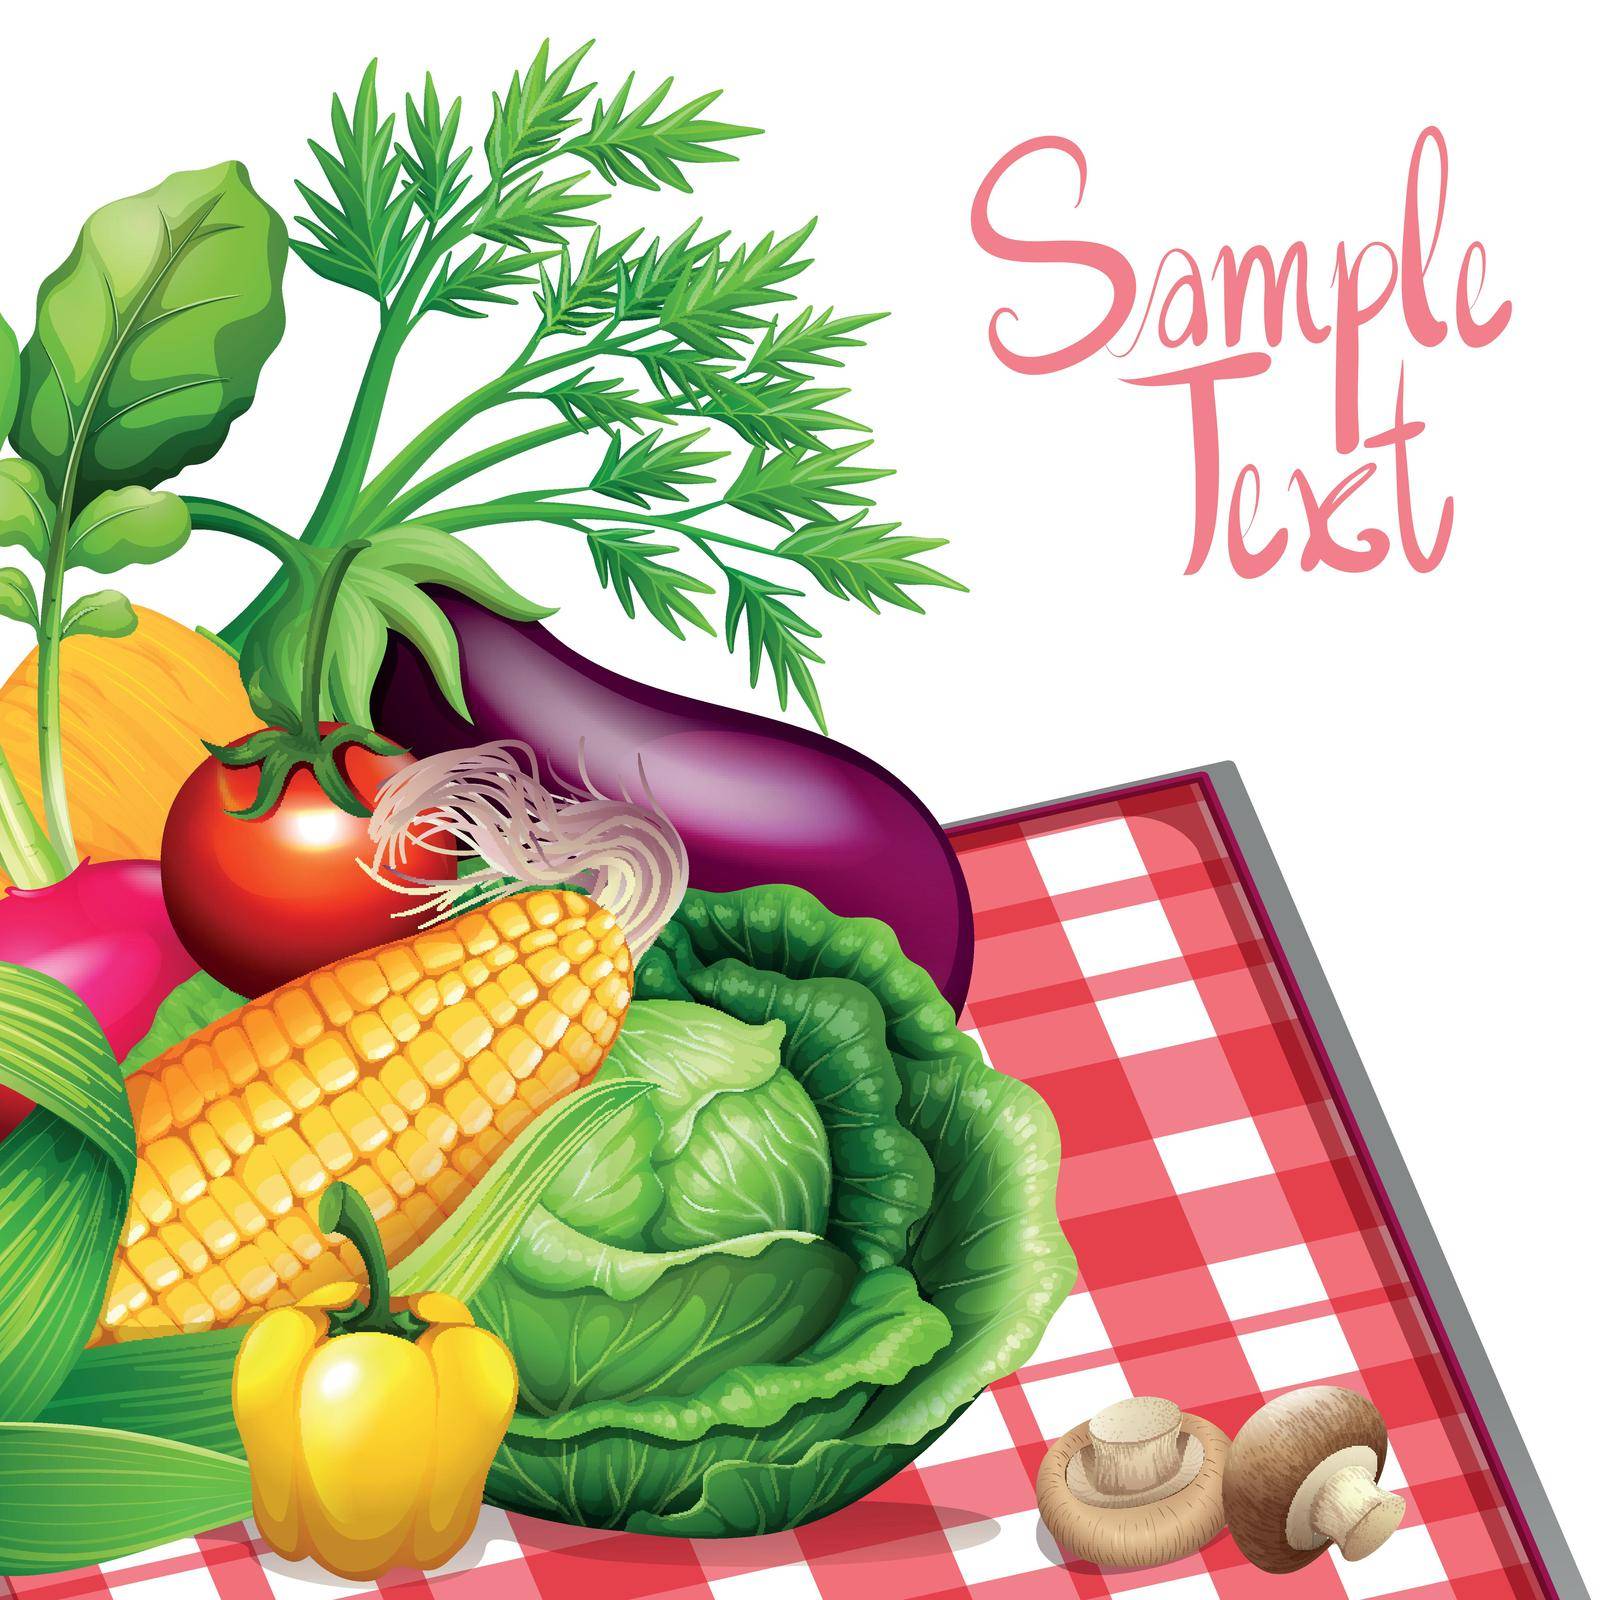 Fresh vegetables with sample text illustration